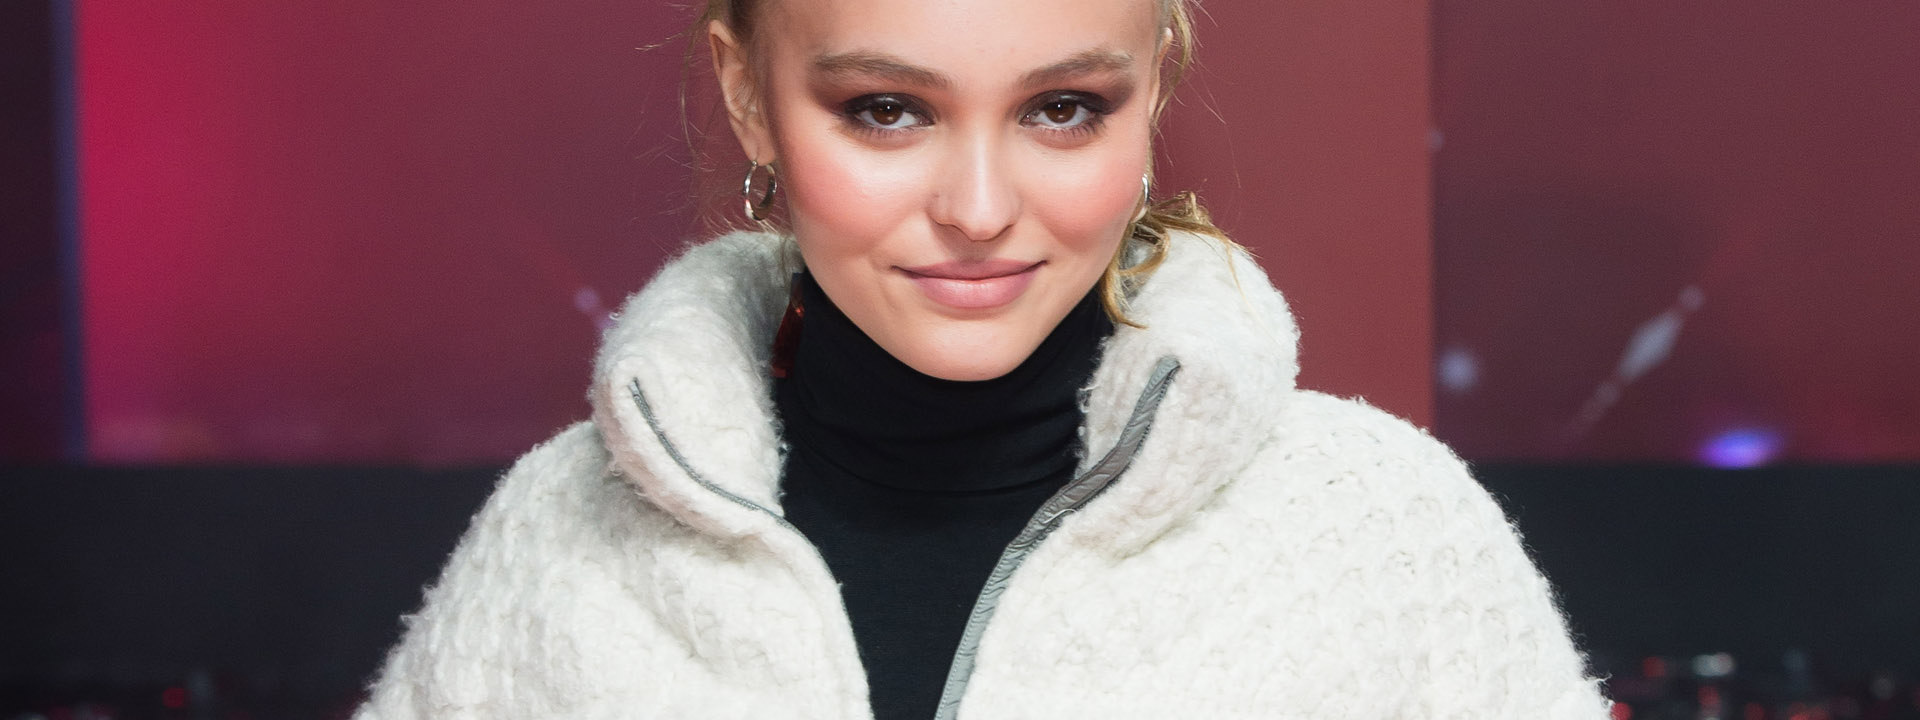 Lily Rose Depp Christmas Lights Launch On The Champs-Elysées (Photo by Stephane Cardinale - Corbis)